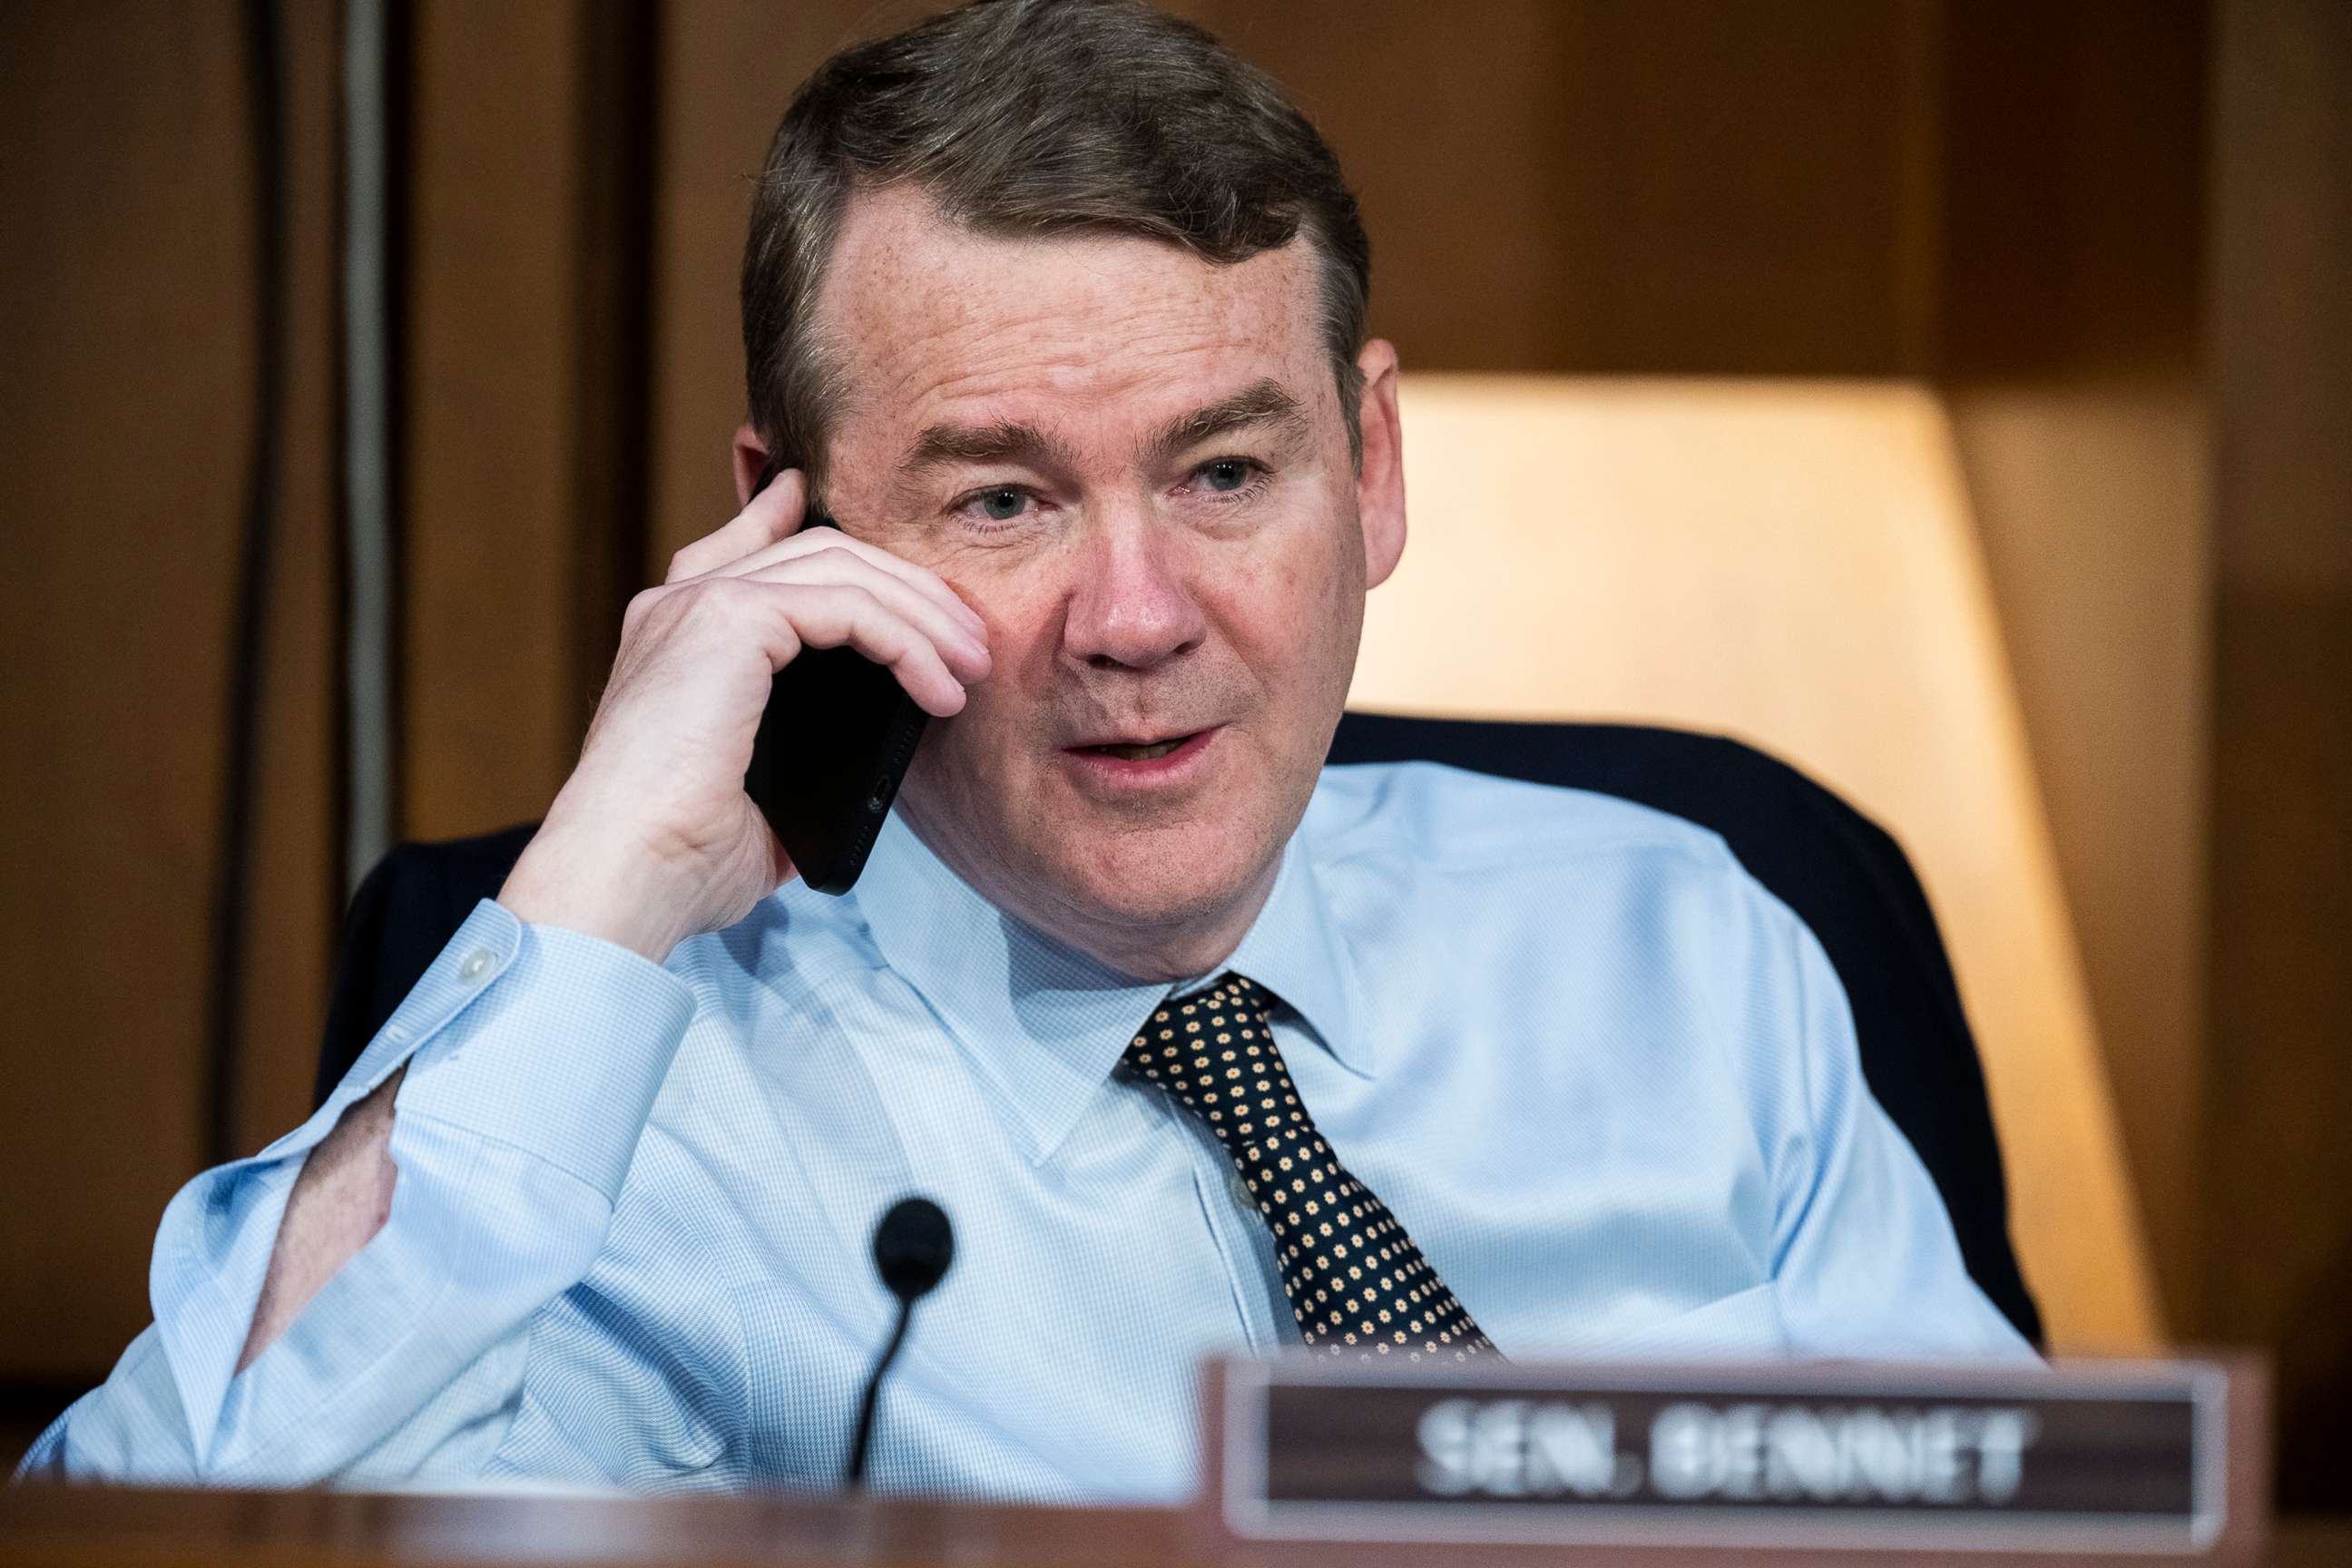 PHOTO: Sen. Michael Bennet attends the Senate Agriculture, Nutrition and Forestry Committee hearing in Washington, May 26, 2022.